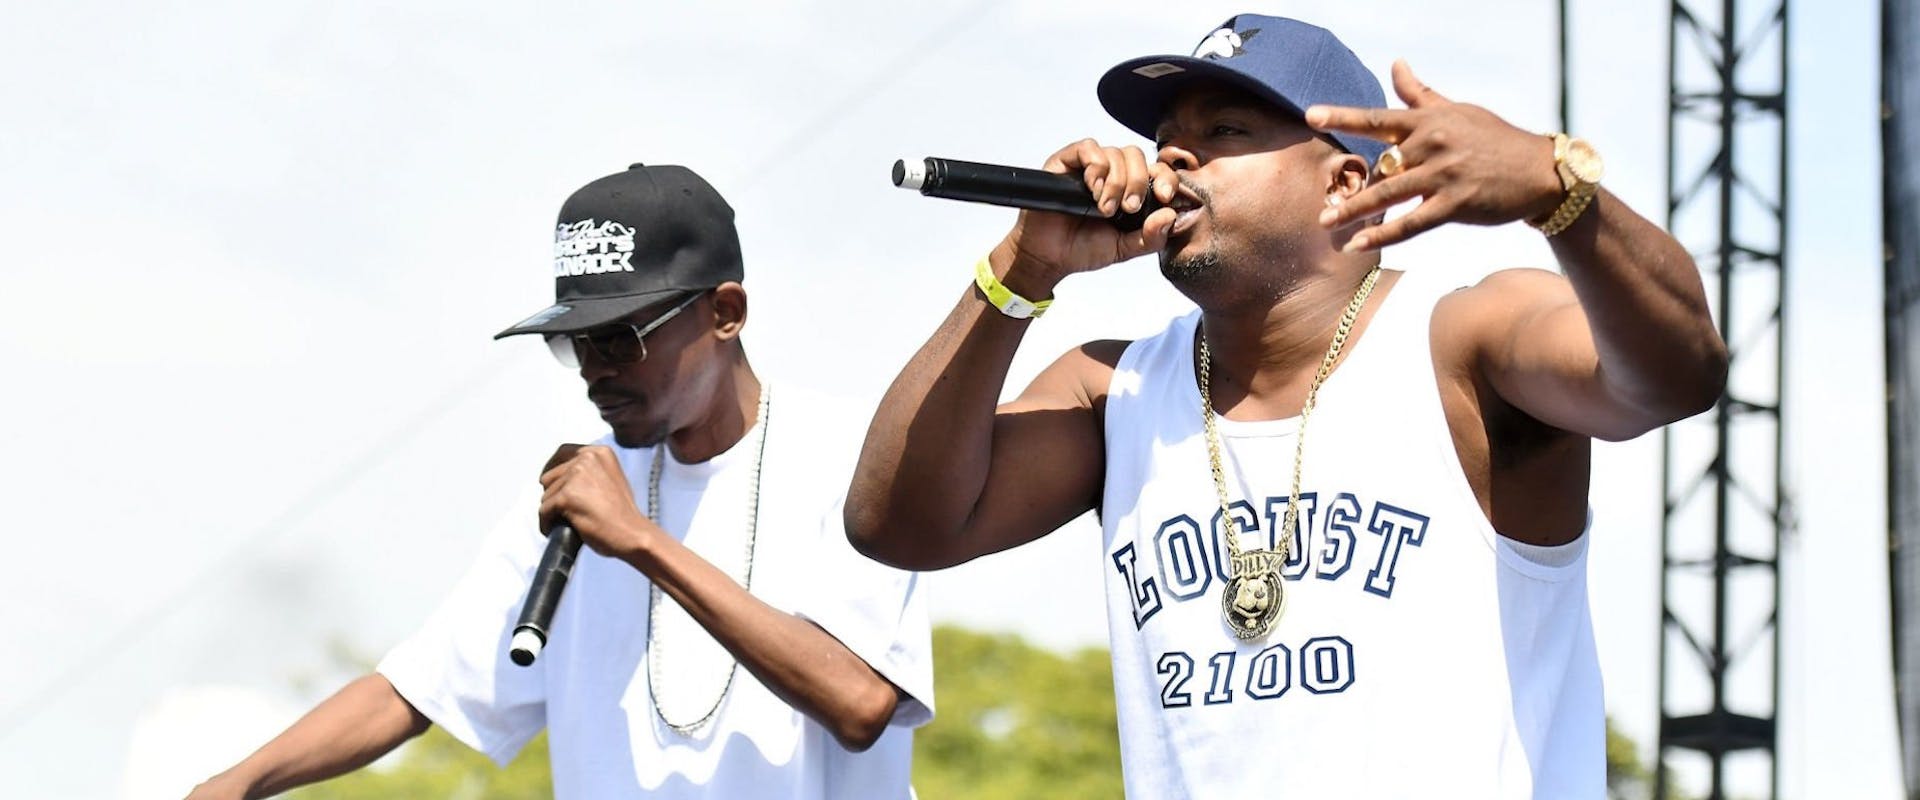 Rappers Kurupt and Daz Dillinger of Tha Dogg Pound perform onstage during the Summertime in the LBC music festival on July 7, 2018 in Long Beach, California. 